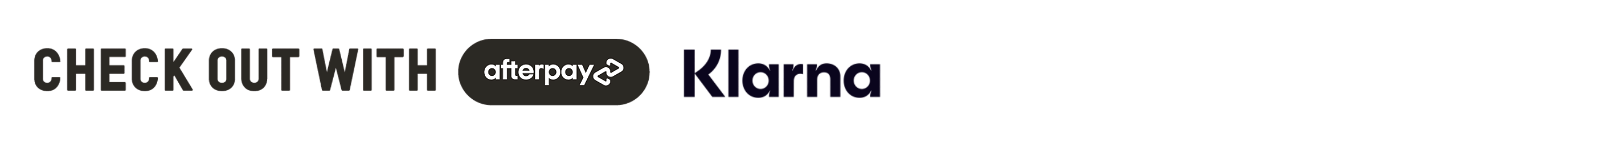 CHECK OUT WITH AFTERPAY OR KLARNA